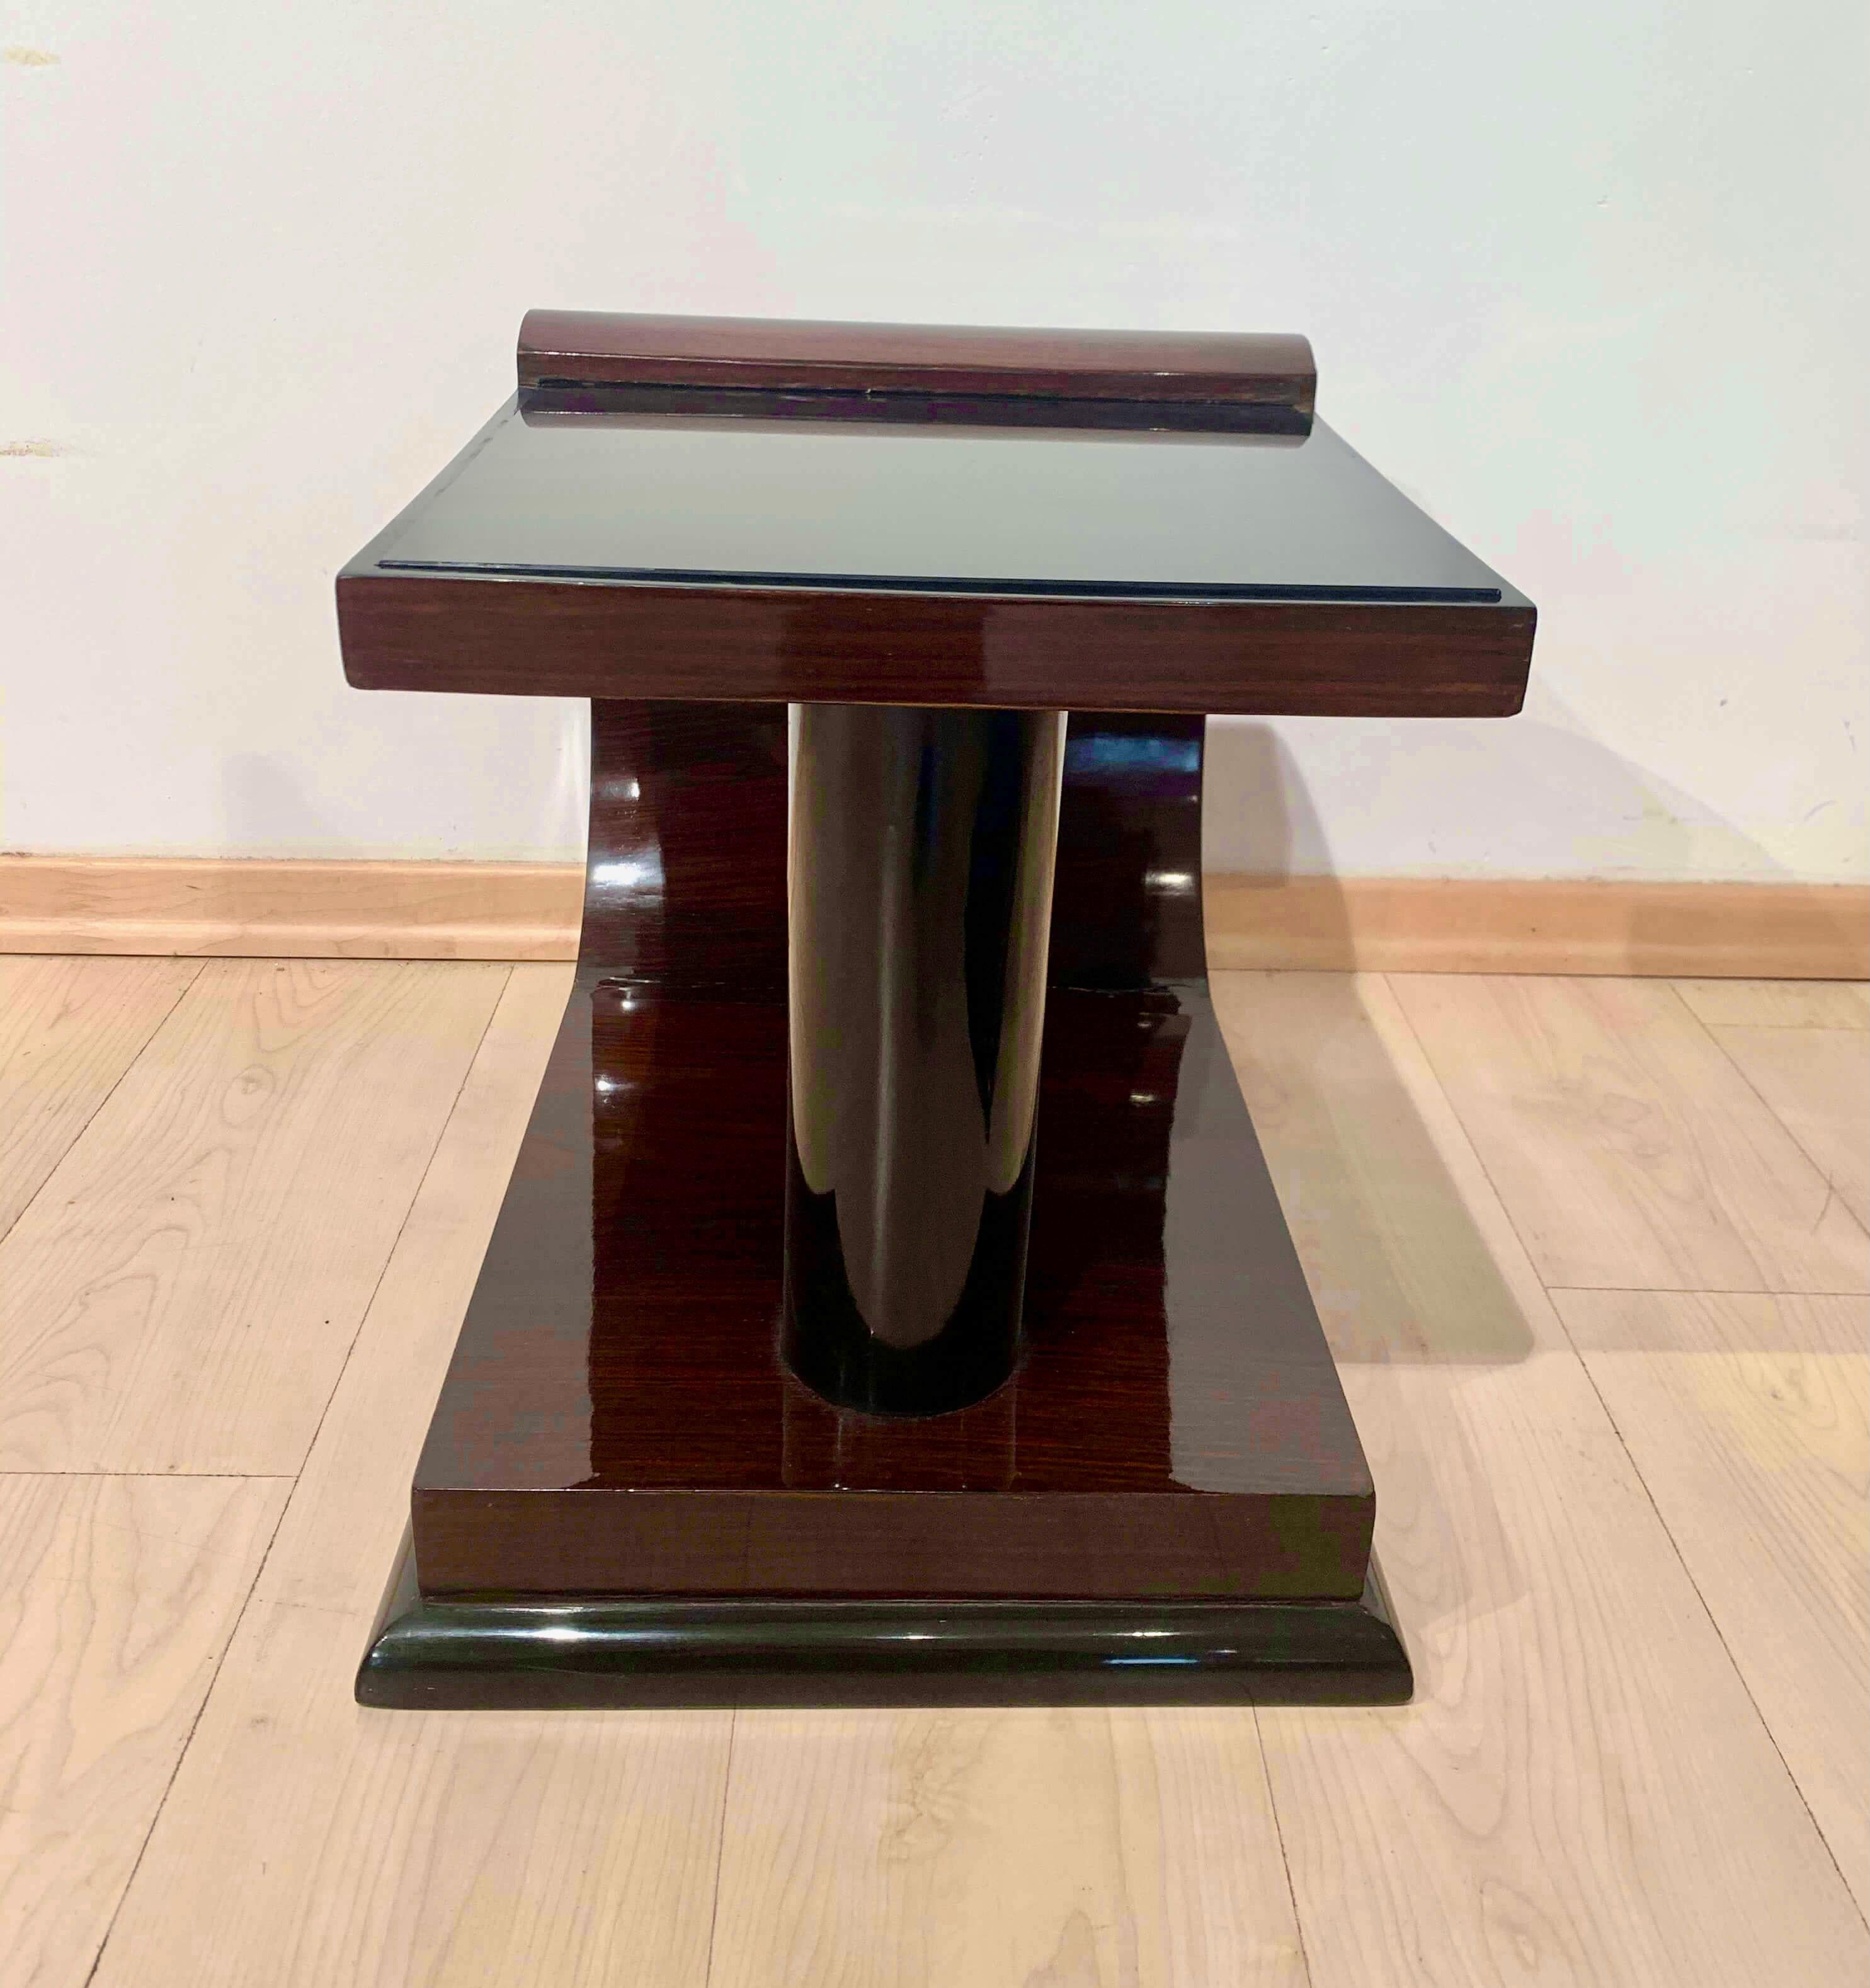 Blackened Pair of Art Deco Side Tables, Rosewood, Ebonized and Glass, France, circa 1930